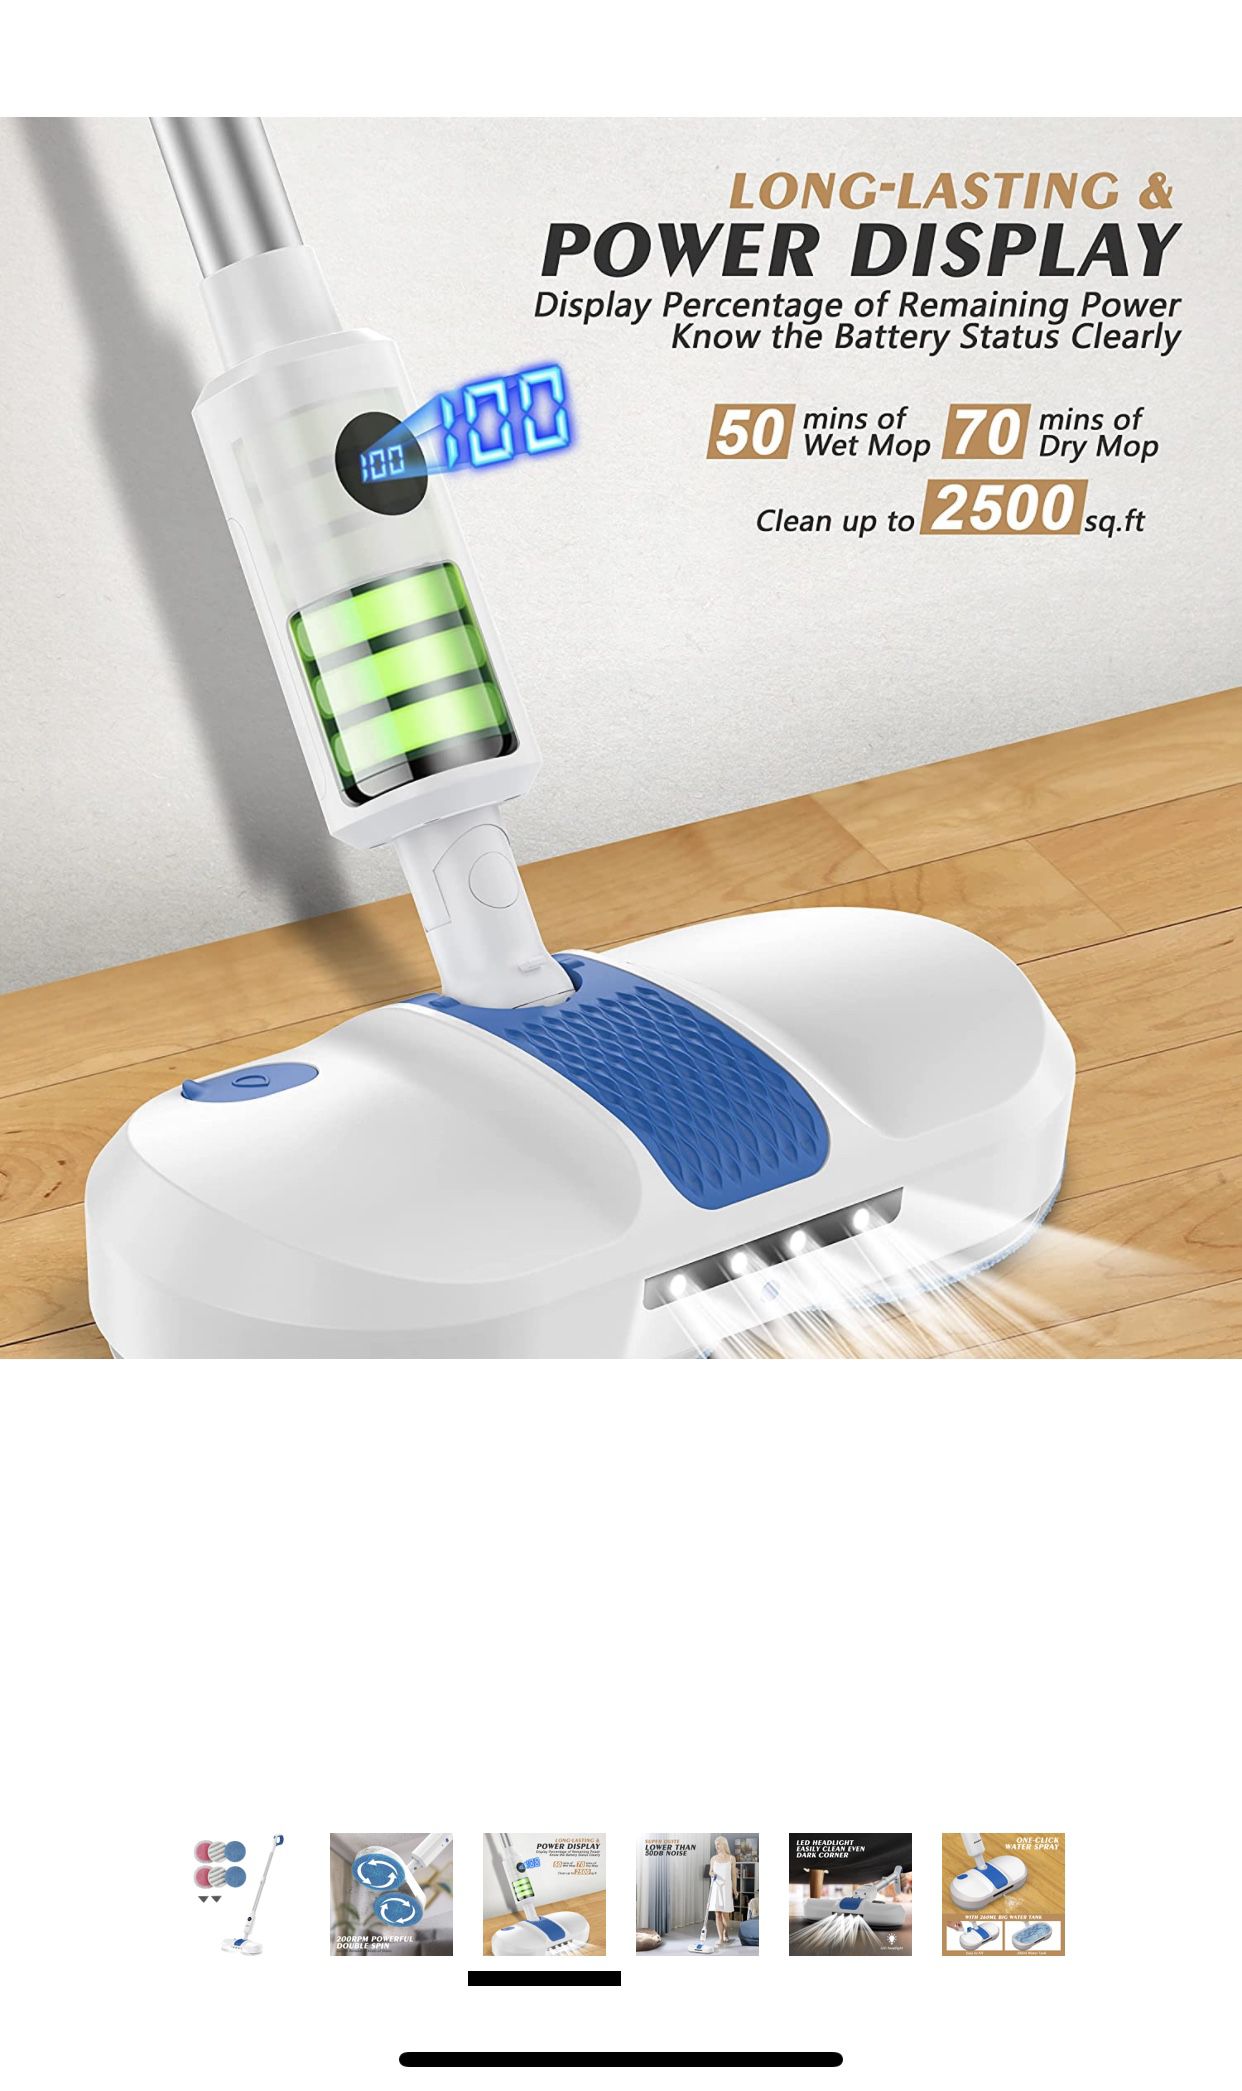 Electric Mop, Cordless Spin Mop for Floor Cleaning, AlfaBot S1 Cordless Mop with Water Sprayer and LED Headlight, Super Quite & Rechargeable Floor